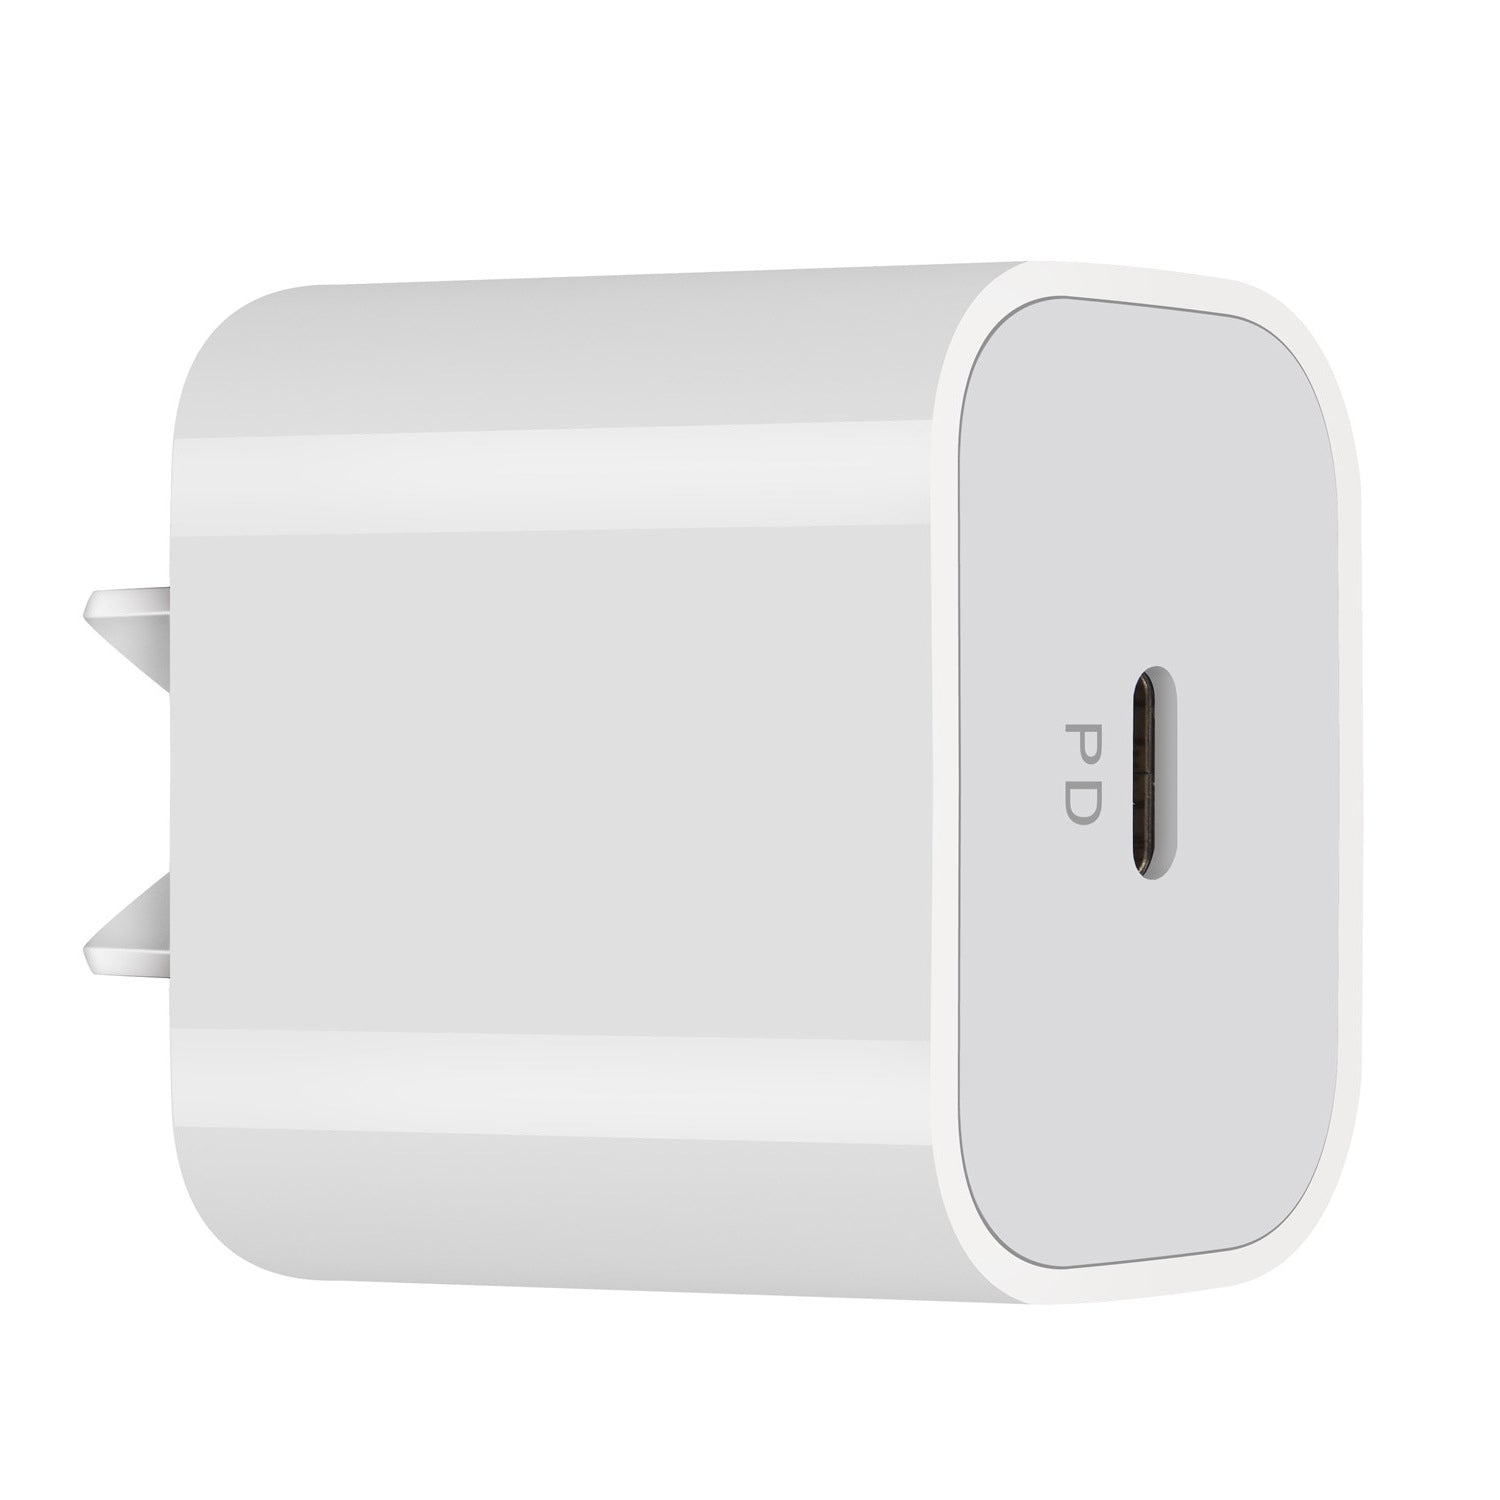 iPhone Fast Charger USB C Adapter 20W - The Shopsite